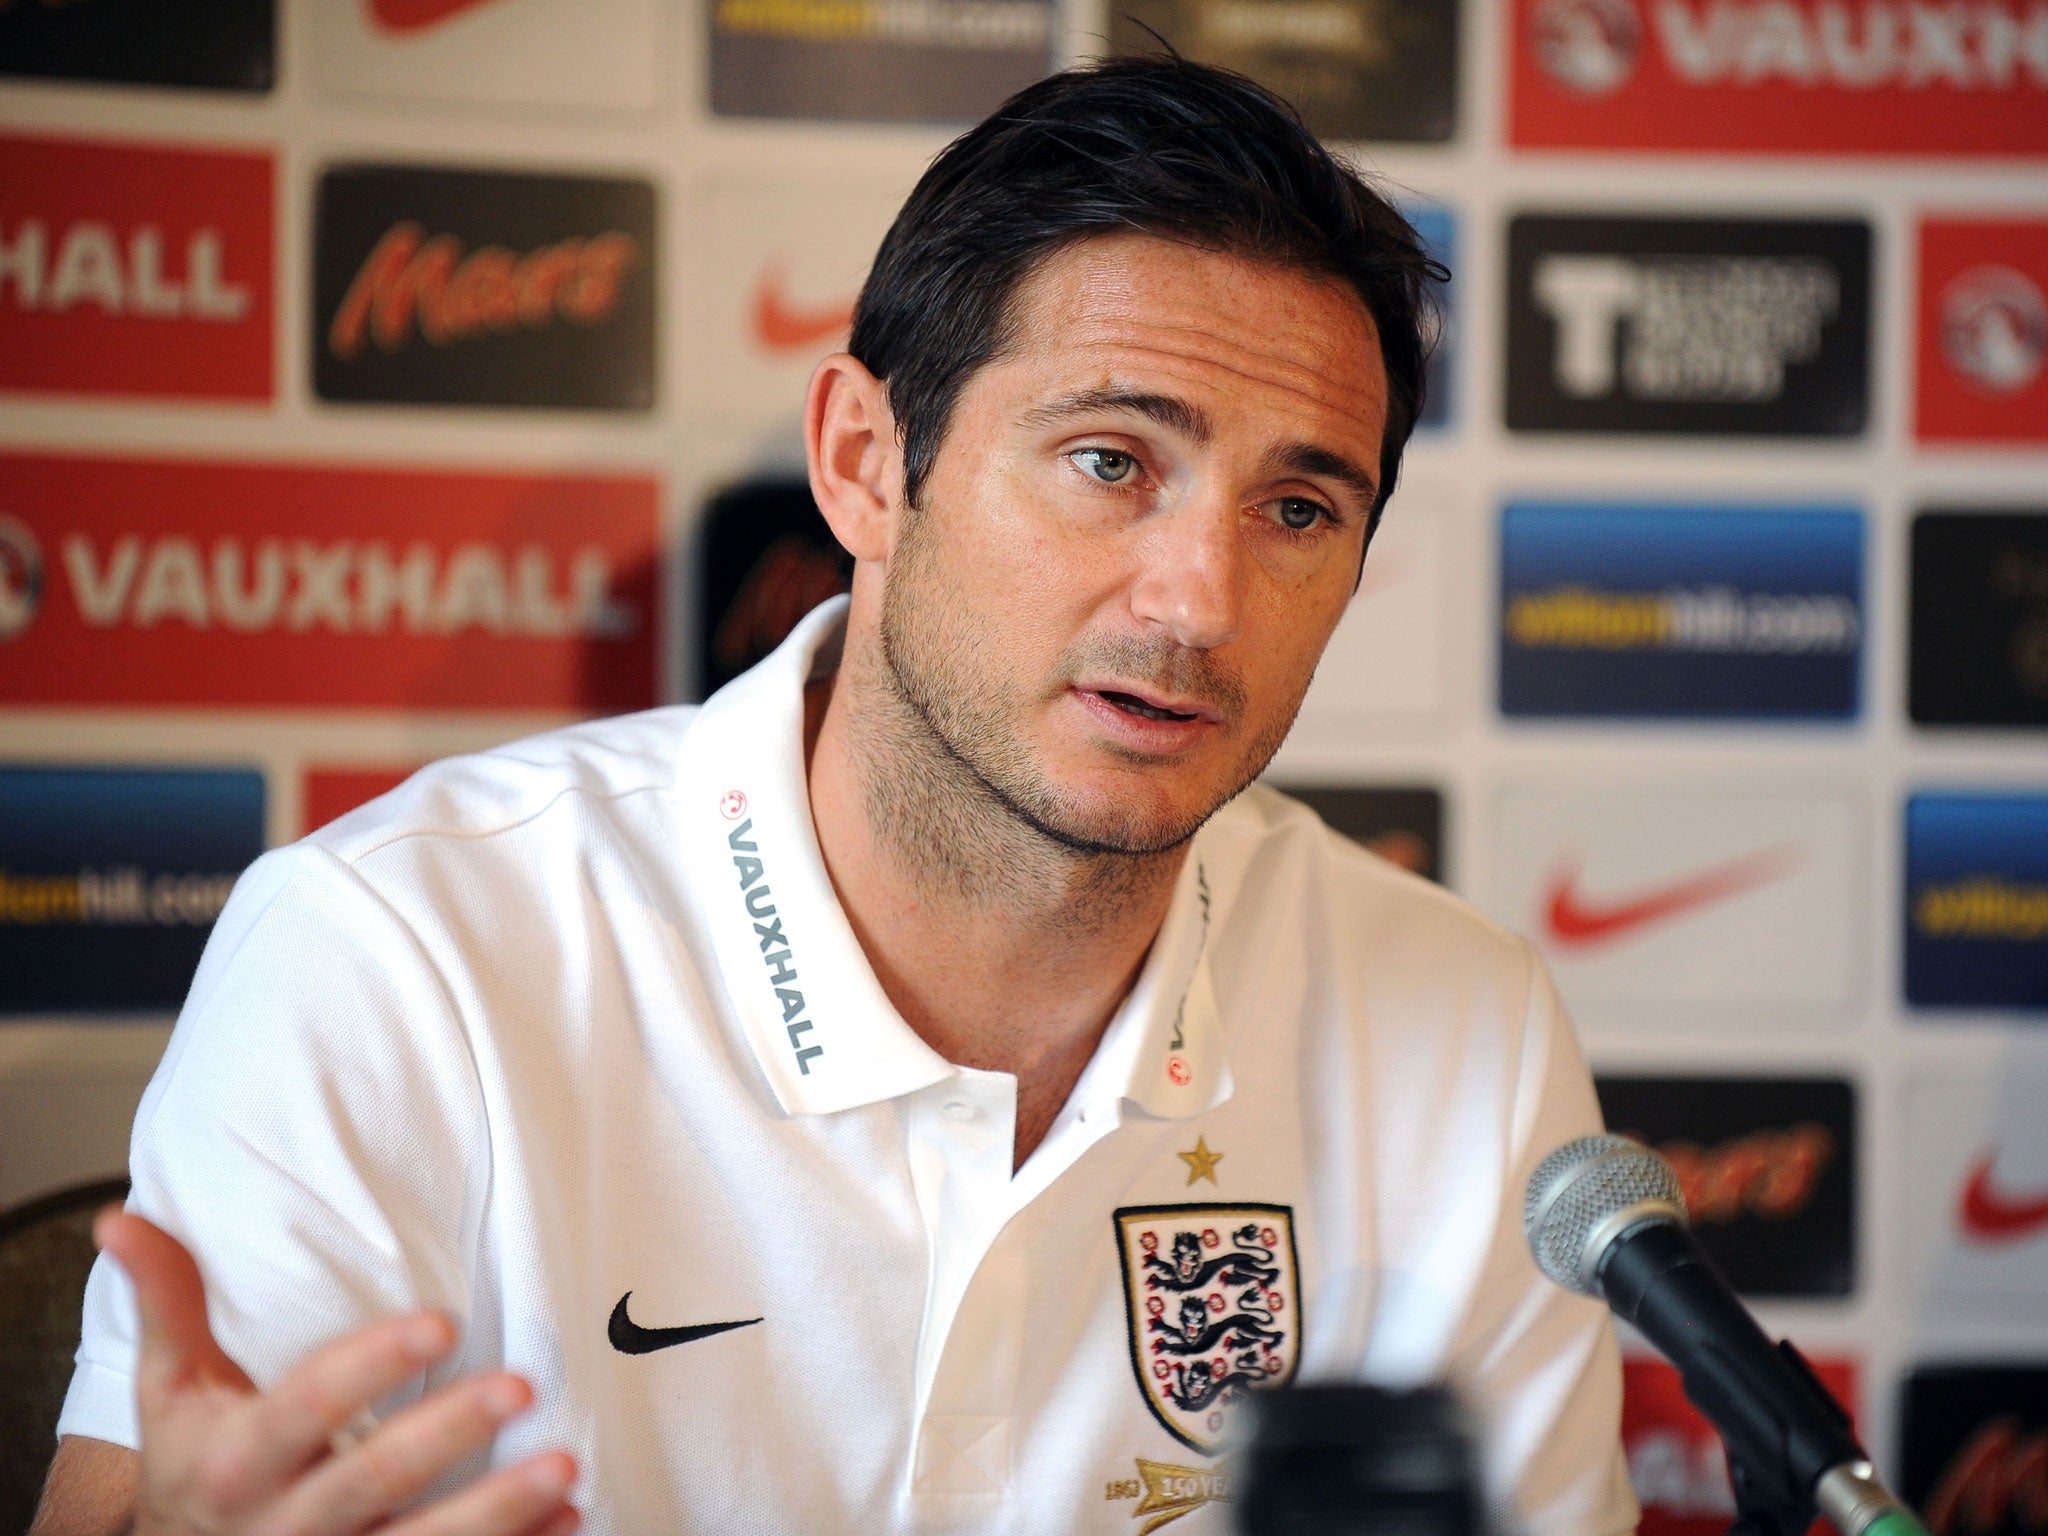 Frank Lampard speaking to the media in advance of a likely 100th England cap